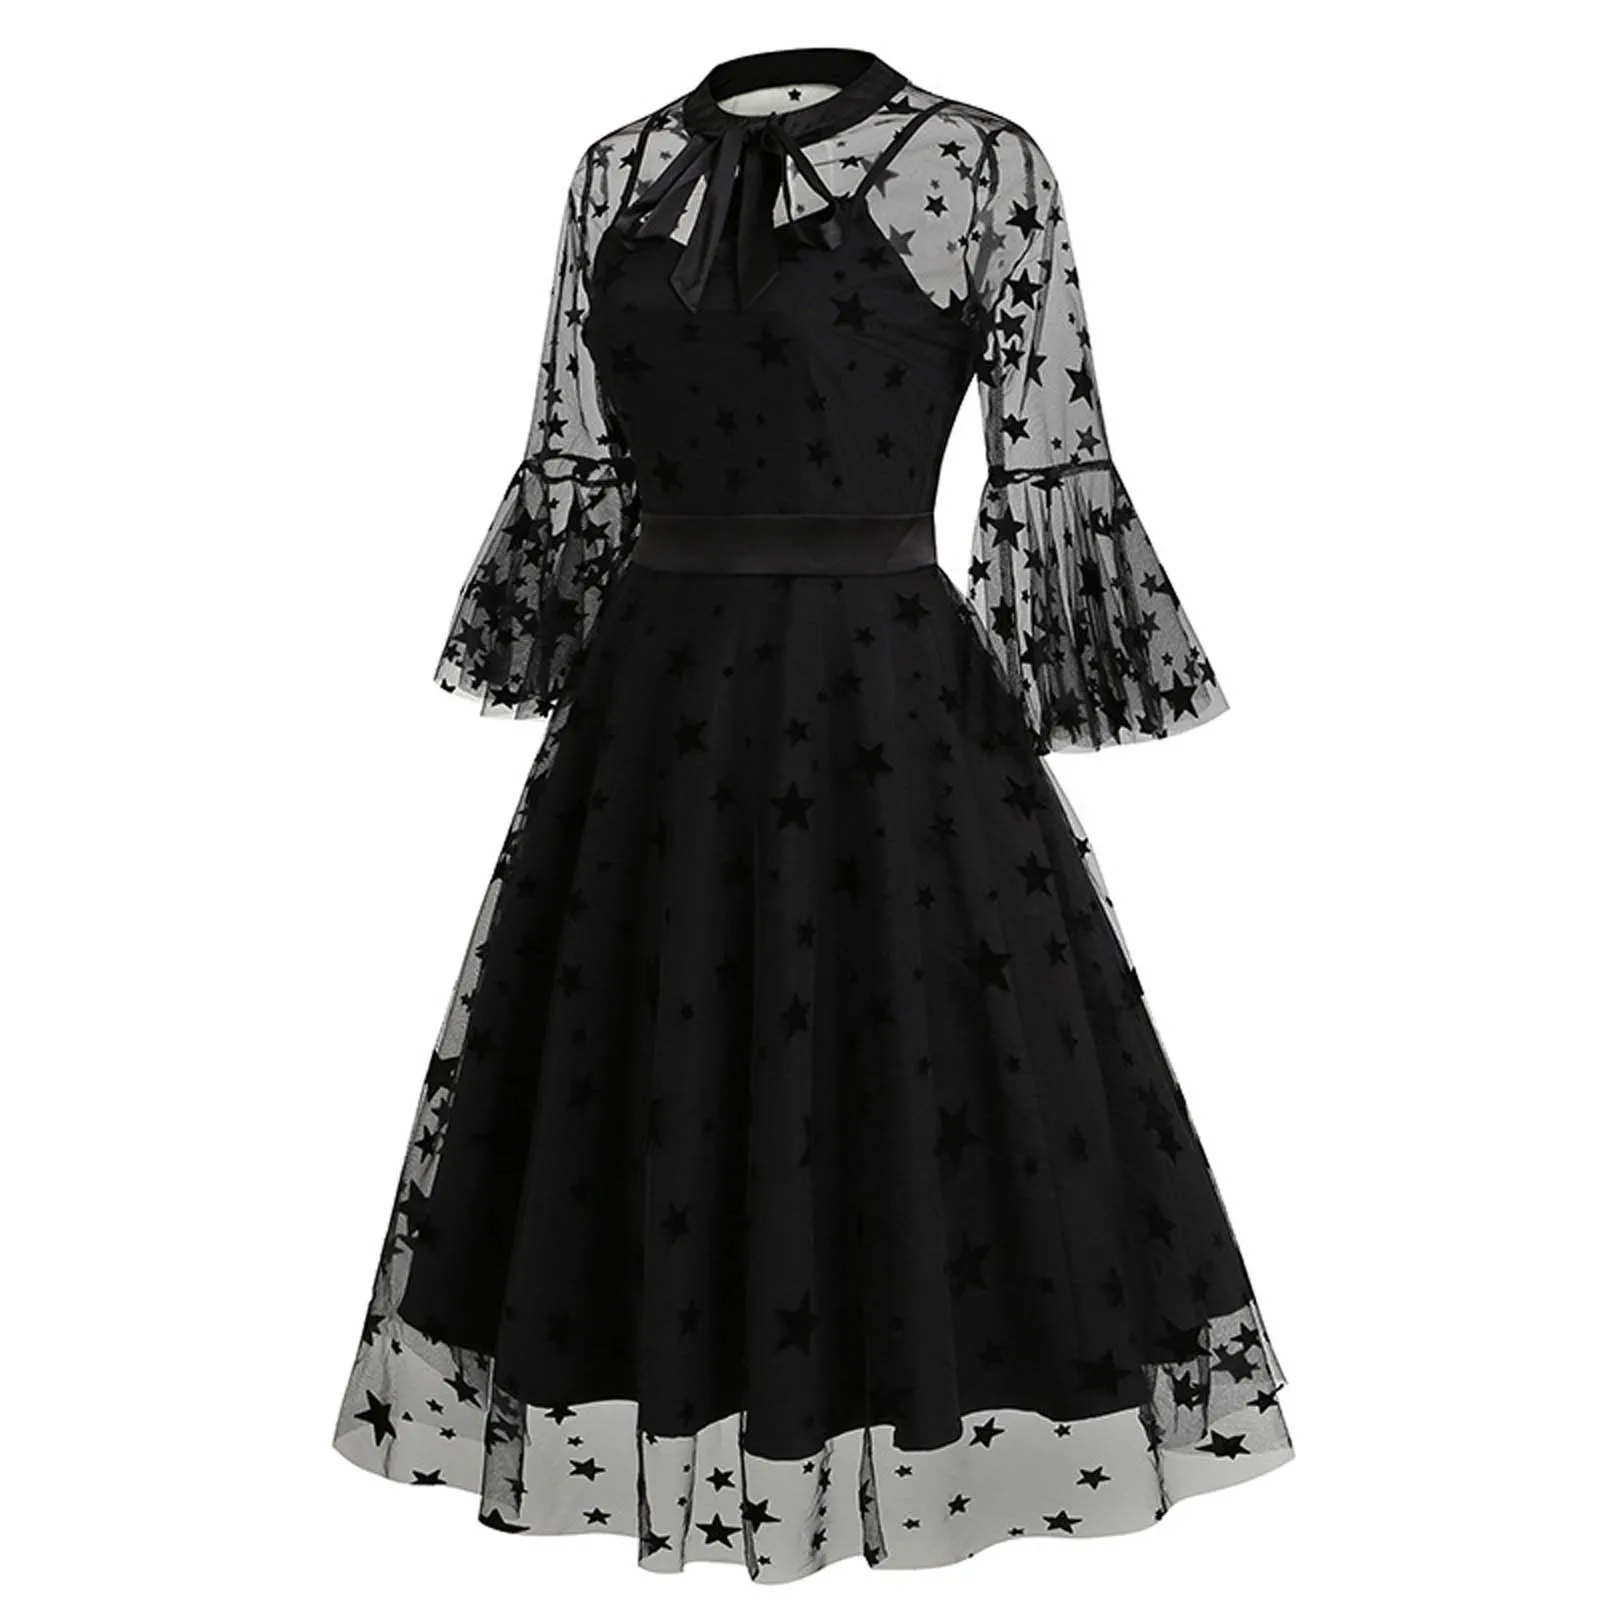 Women's Cocktail Dress Transparent See Though Mesh Long Sleeve Butterfly Embroidery A-Line Ruched Black Dress Formal Party Dress